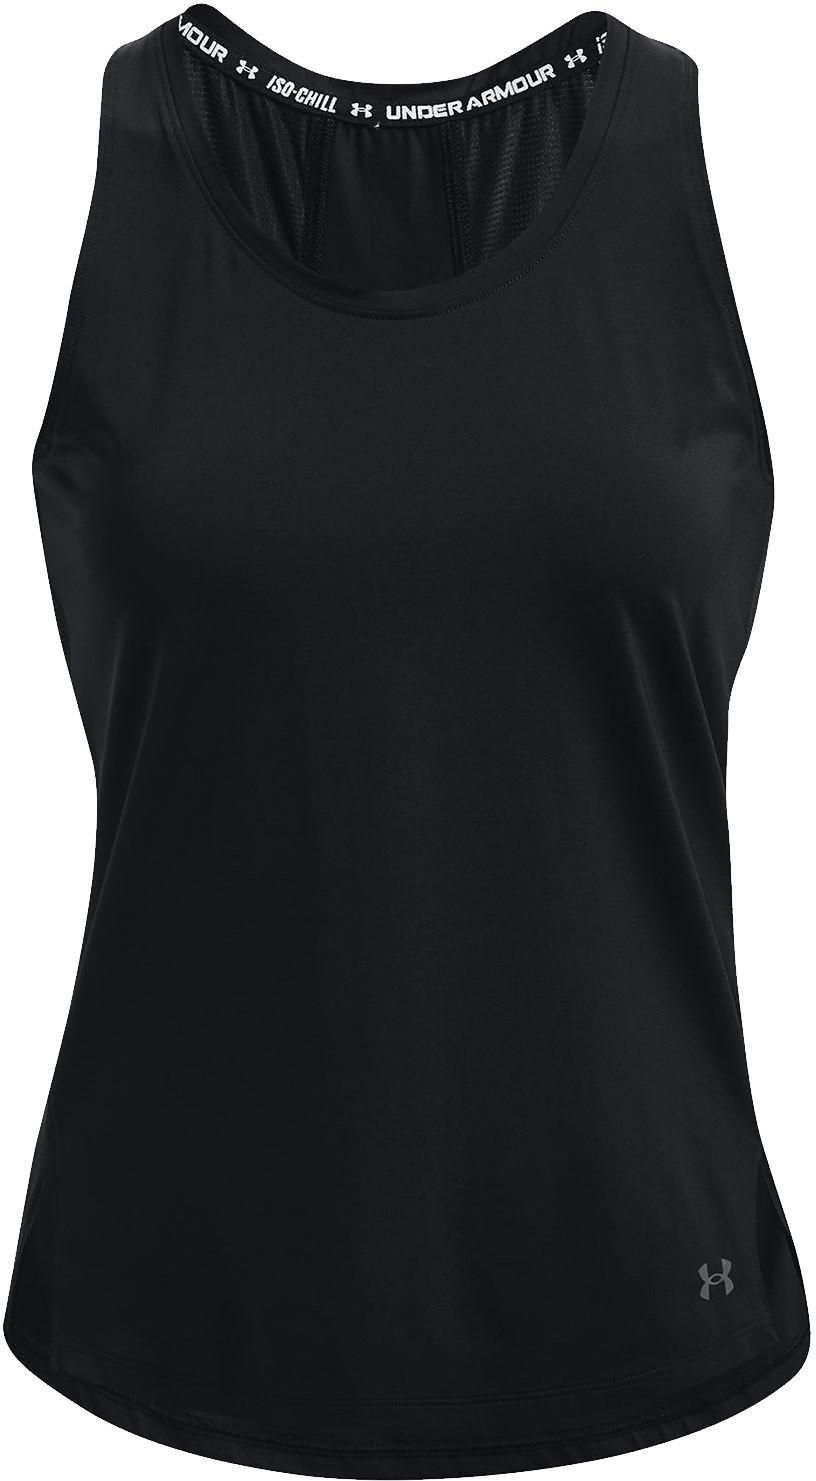 Under Armour Seamless Tank Top Black 1351447-001 - Free Shipping at LASC